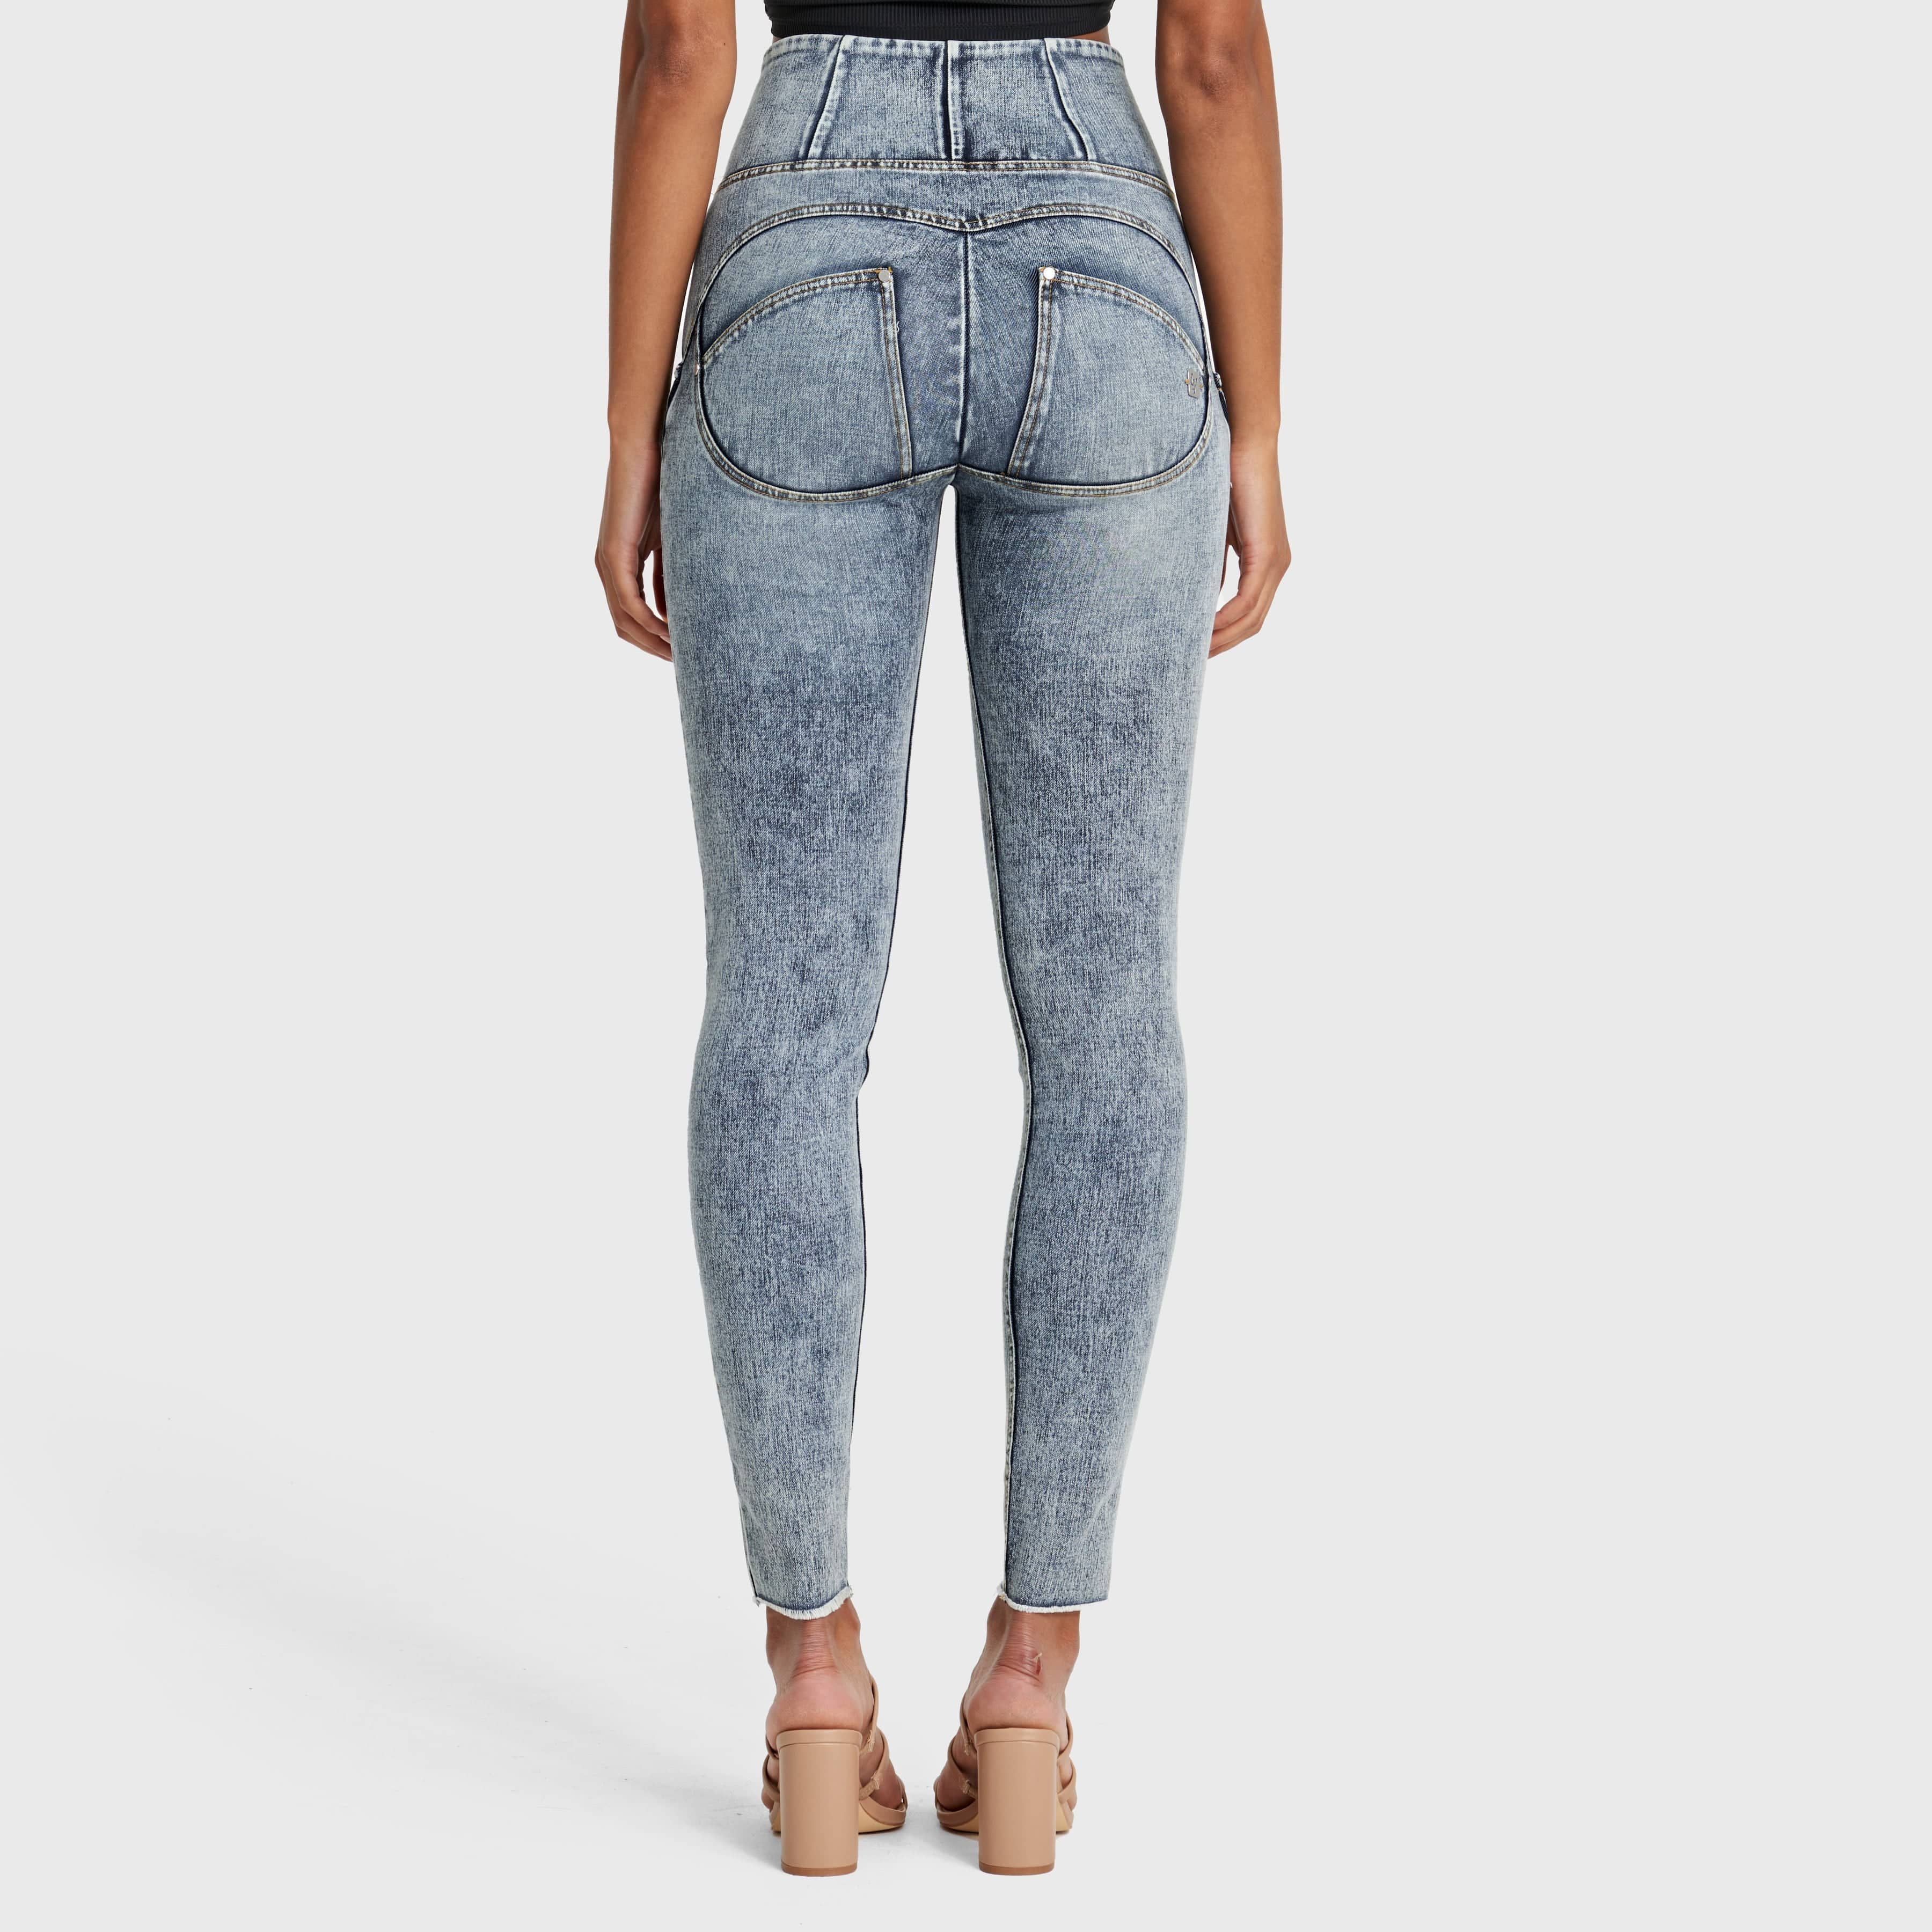 WR.UP® Snug Ripped Jeans - High Waisted - Full Length - Blue Stonewash + Yellow Stitching 3